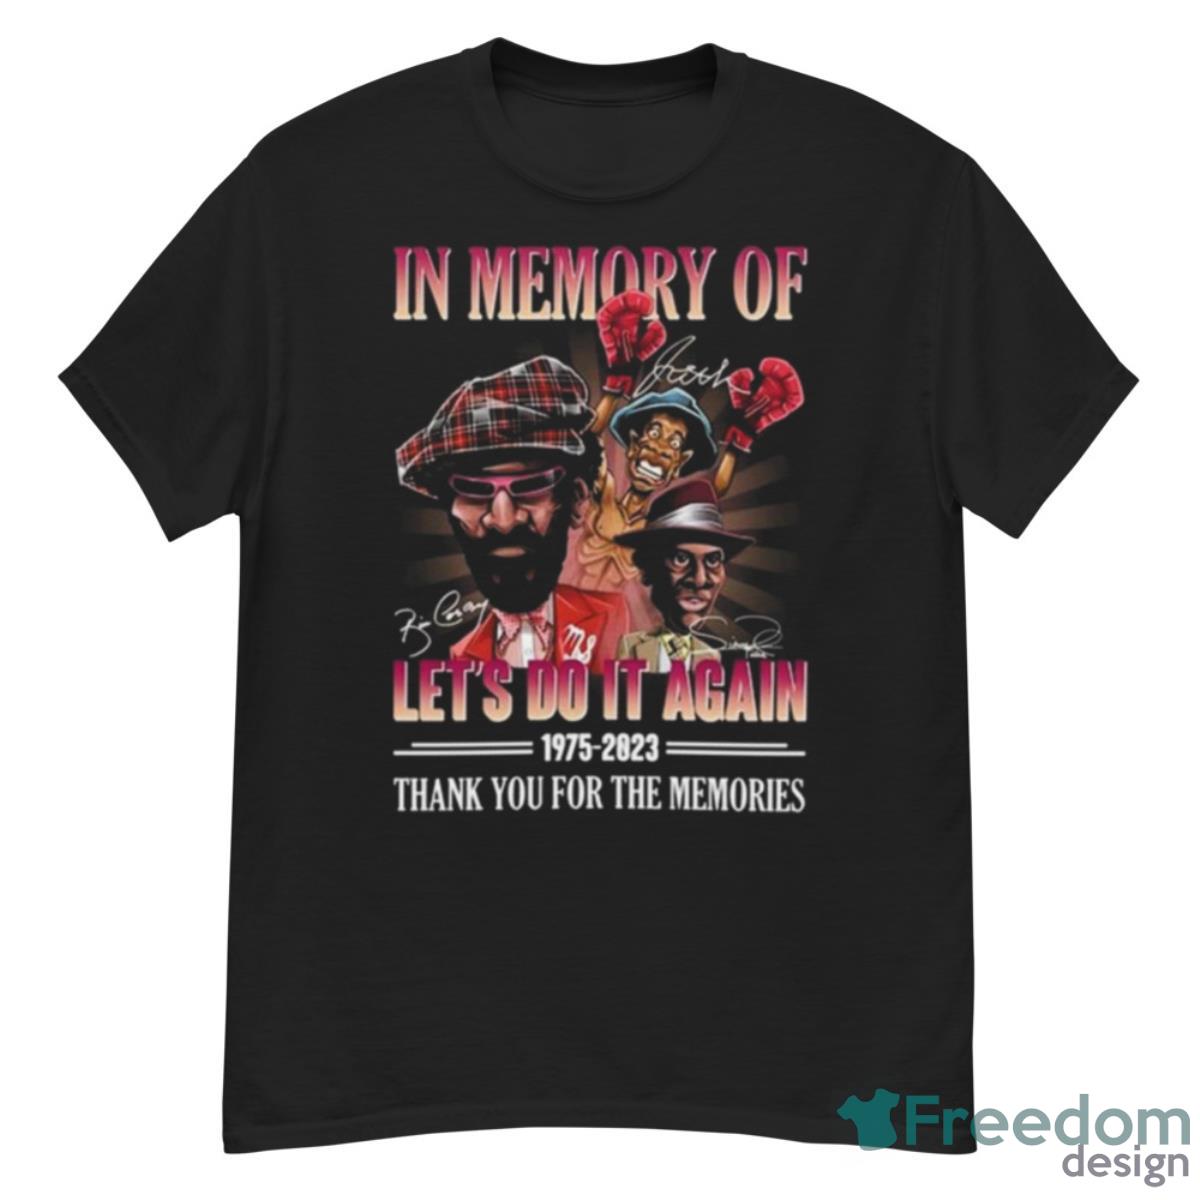 In Memory Of Let’s Do It Again Movies 1975 – 2023 Thank You For The Memories Signatures Shirt - G500 Men’s Classic T-Shirt